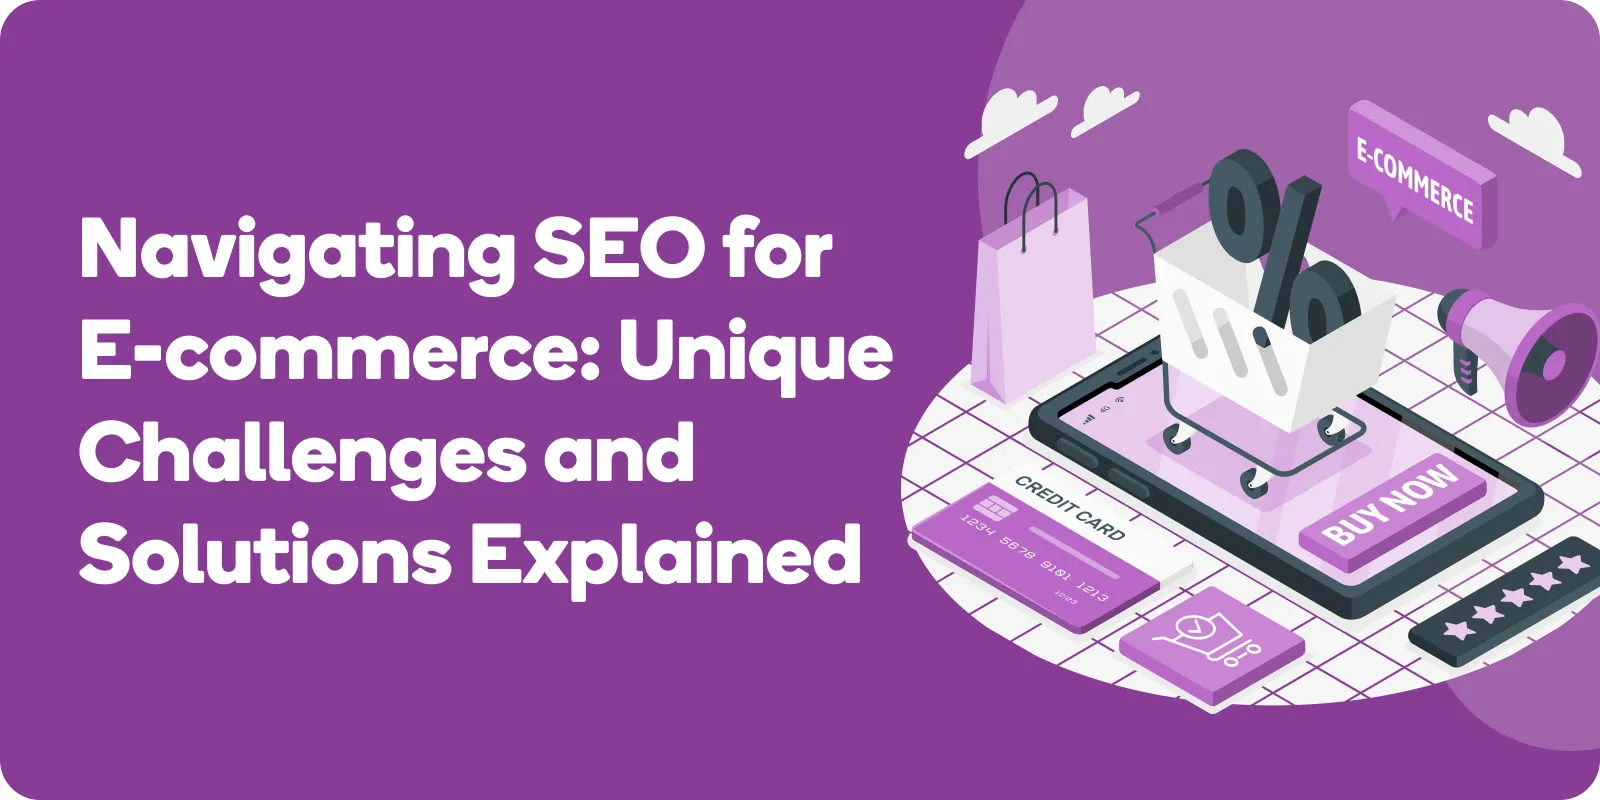 Navigating-SEO-for-E-commerce_-Unique-Challenges-and-Solutions-Explained